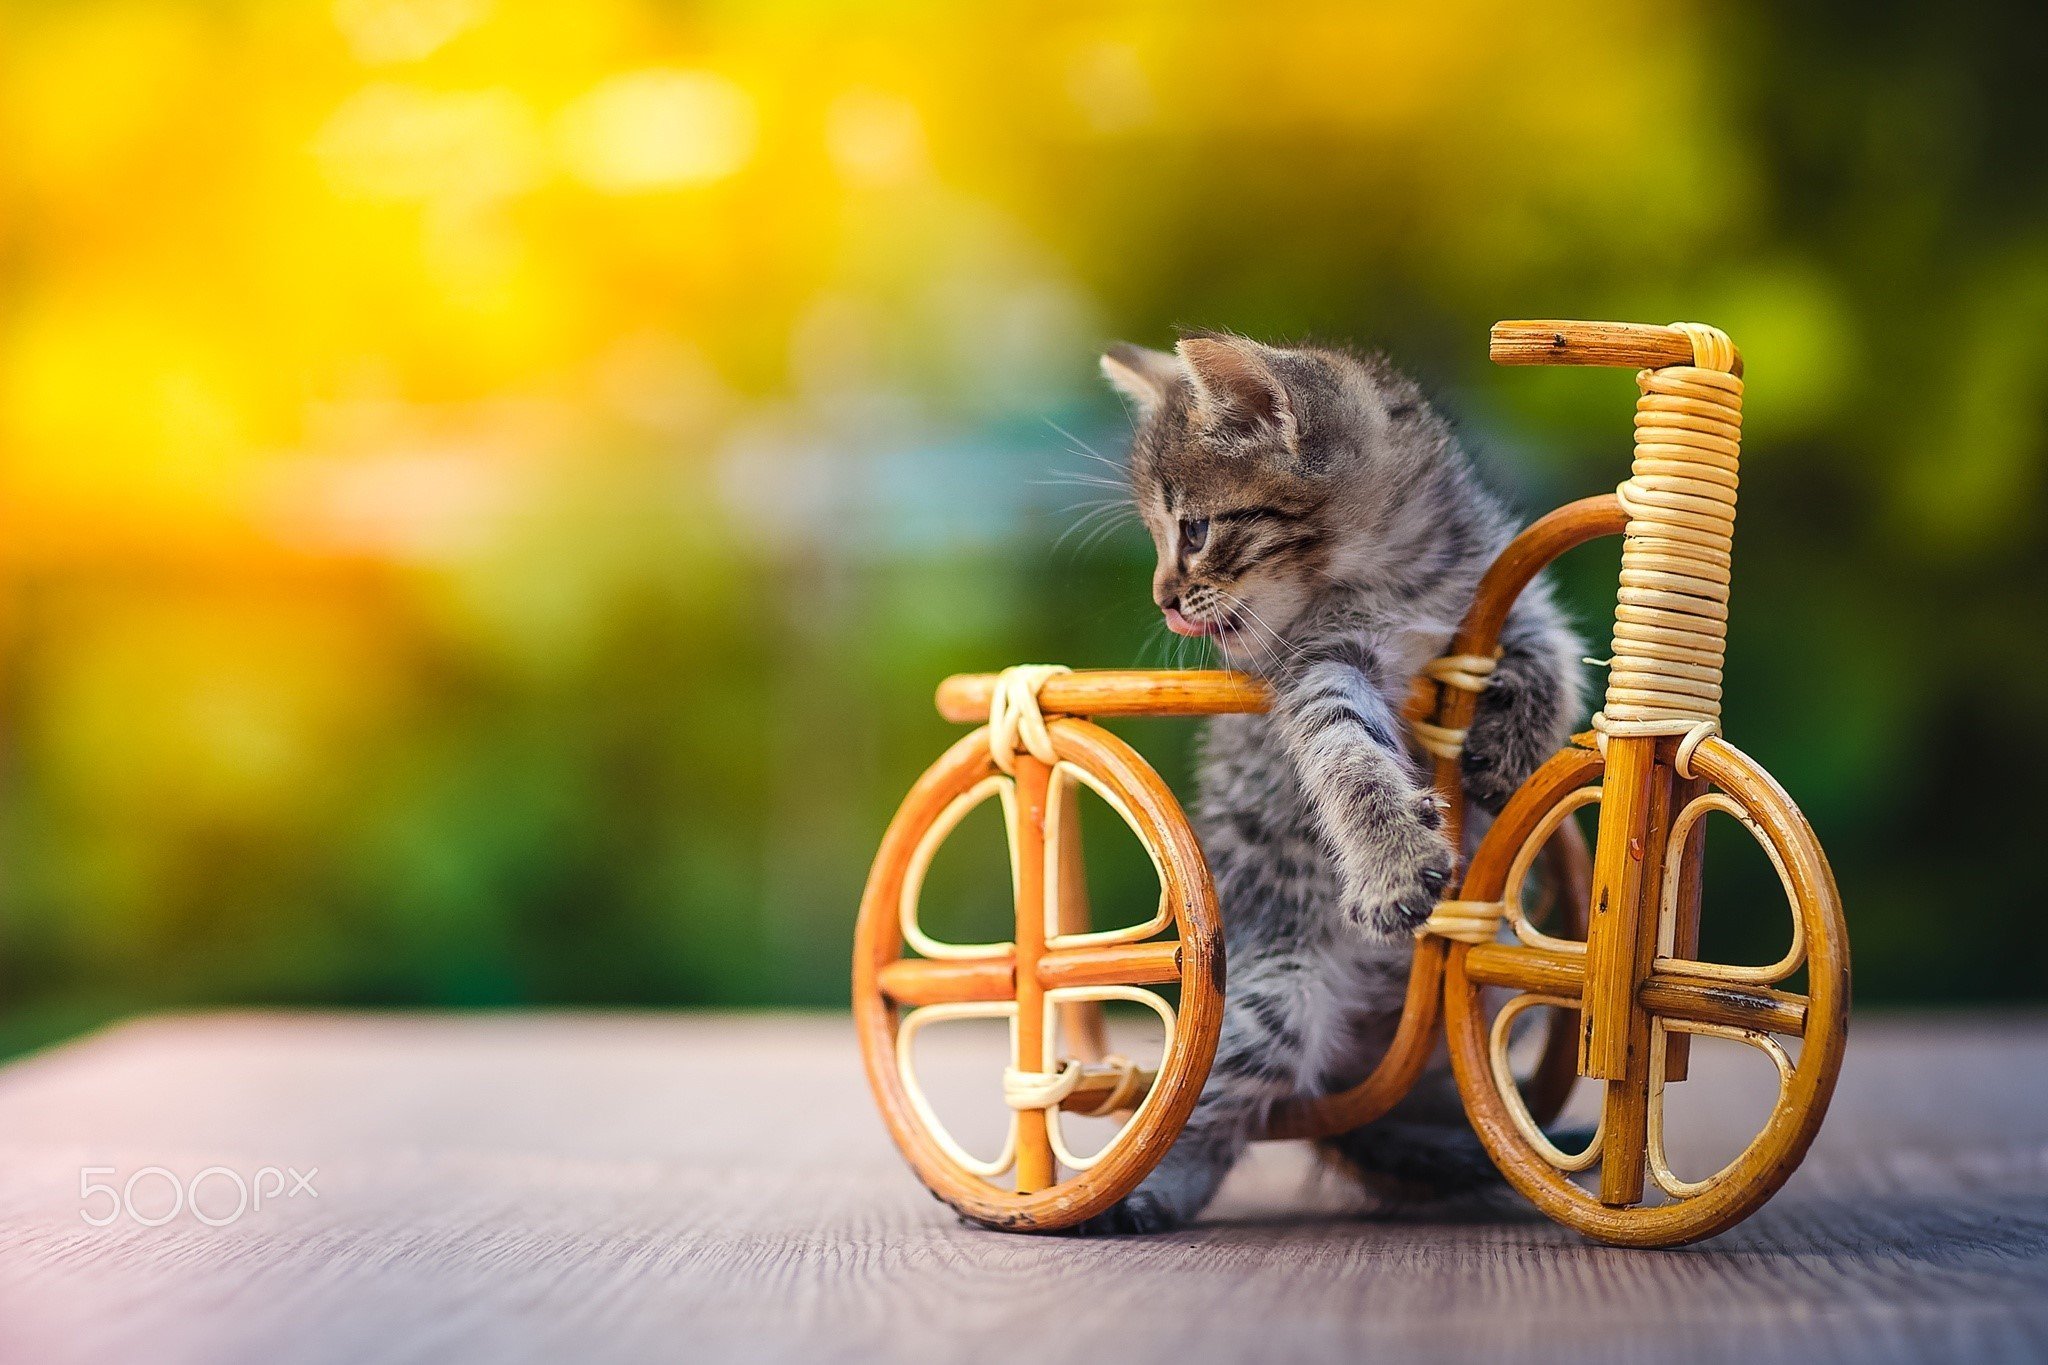 nature, Animals, Cat, Kittens, Baby animals, Bicycle, Miniatures, Wood, Wooden surface, Depth of field, Outdoors Wallpaper